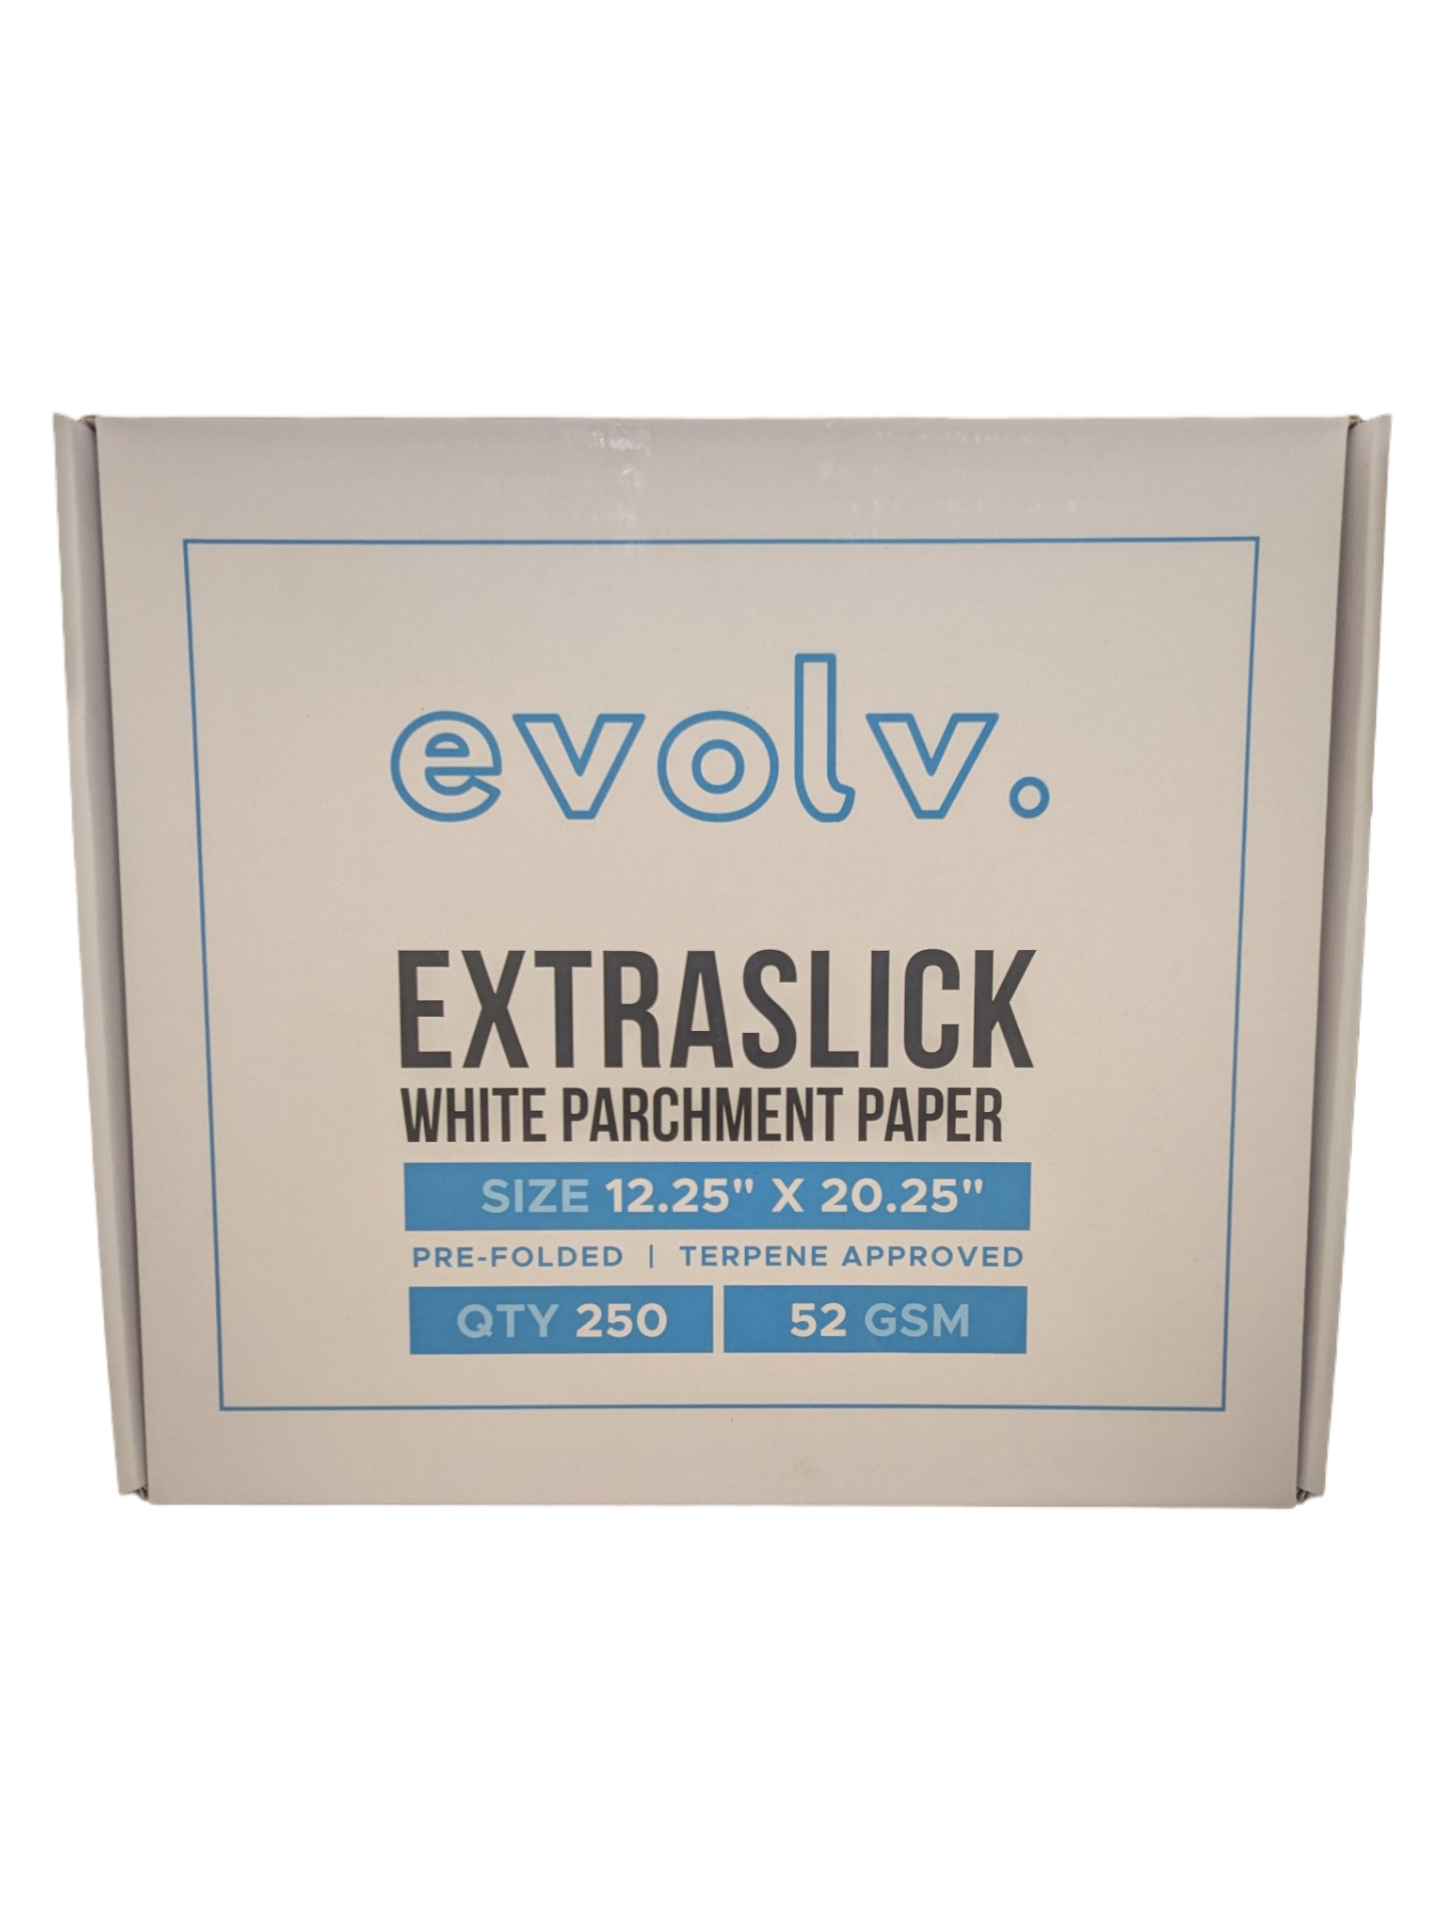 EVOLV | Rosin Press Parchment Sheets | Pre-Folded & Extra-Slick Sheets | 12.25"x20.25" | 250 Count